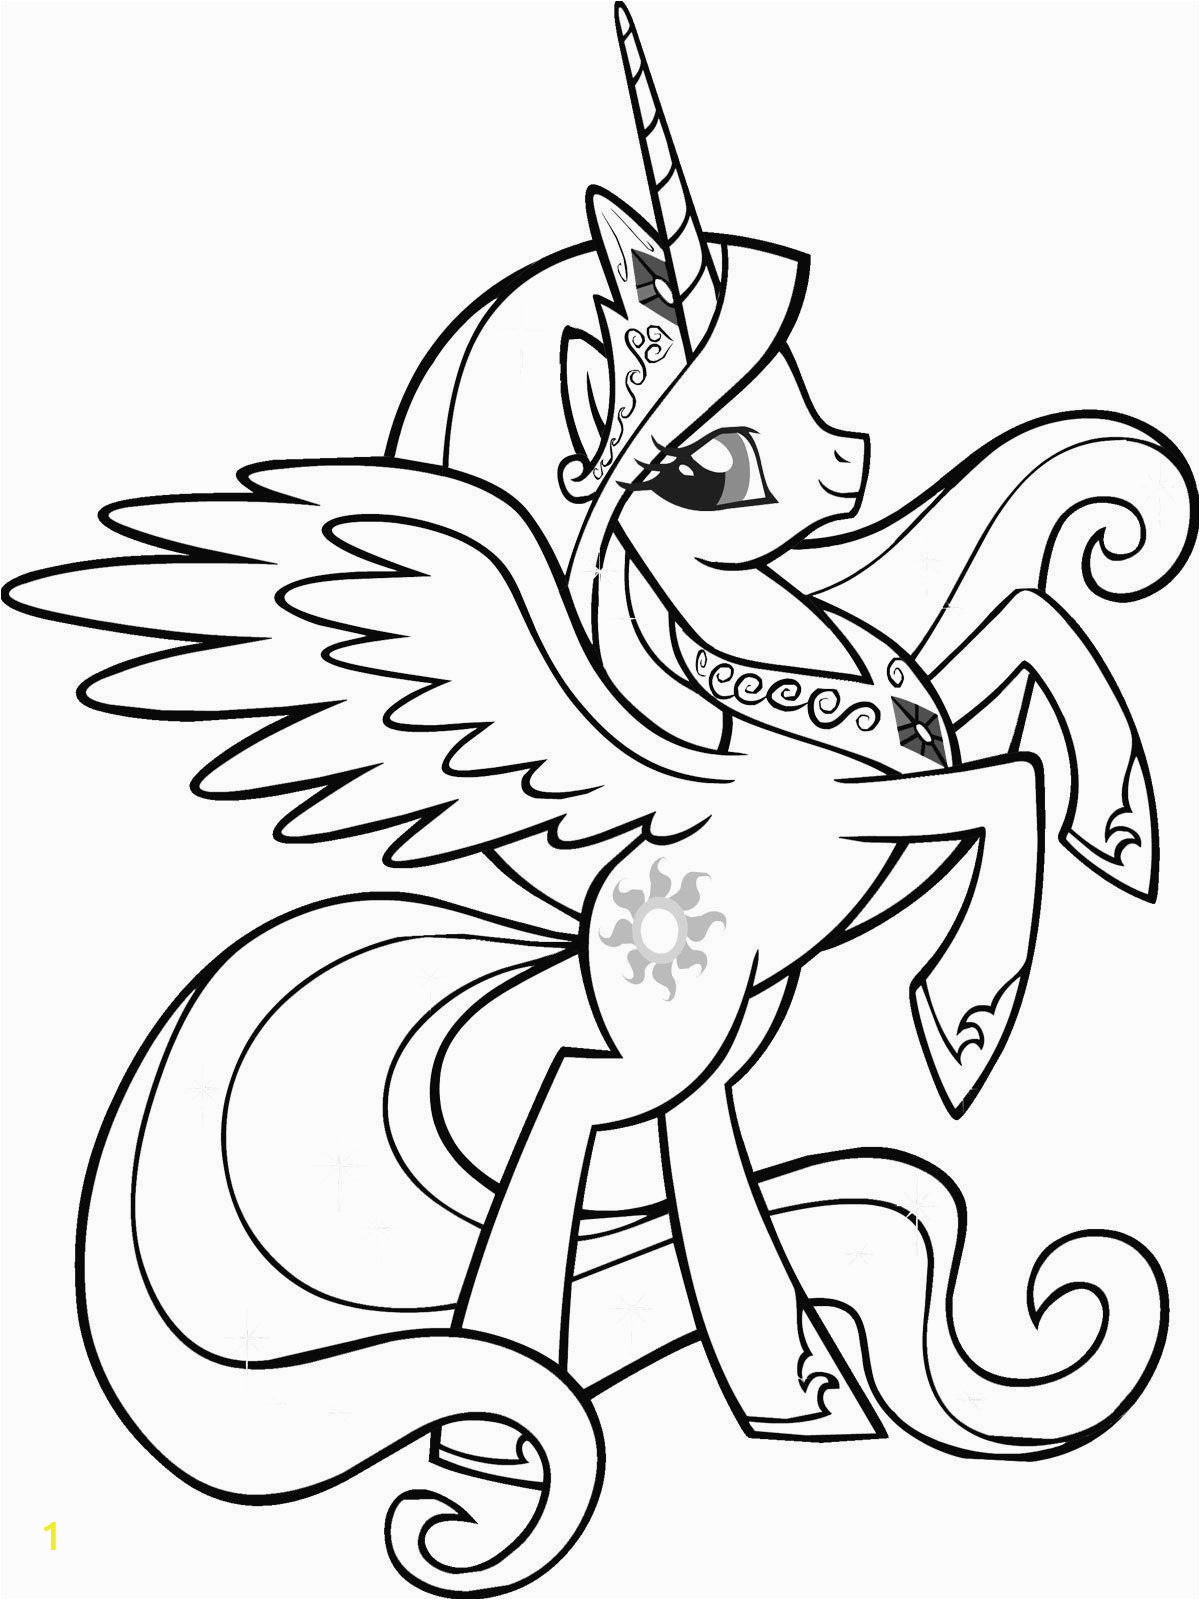 Twilight Sparkle My Little Pony Coloring Pages Princess Luna My Little Pony Coloring Page Luxury My Little